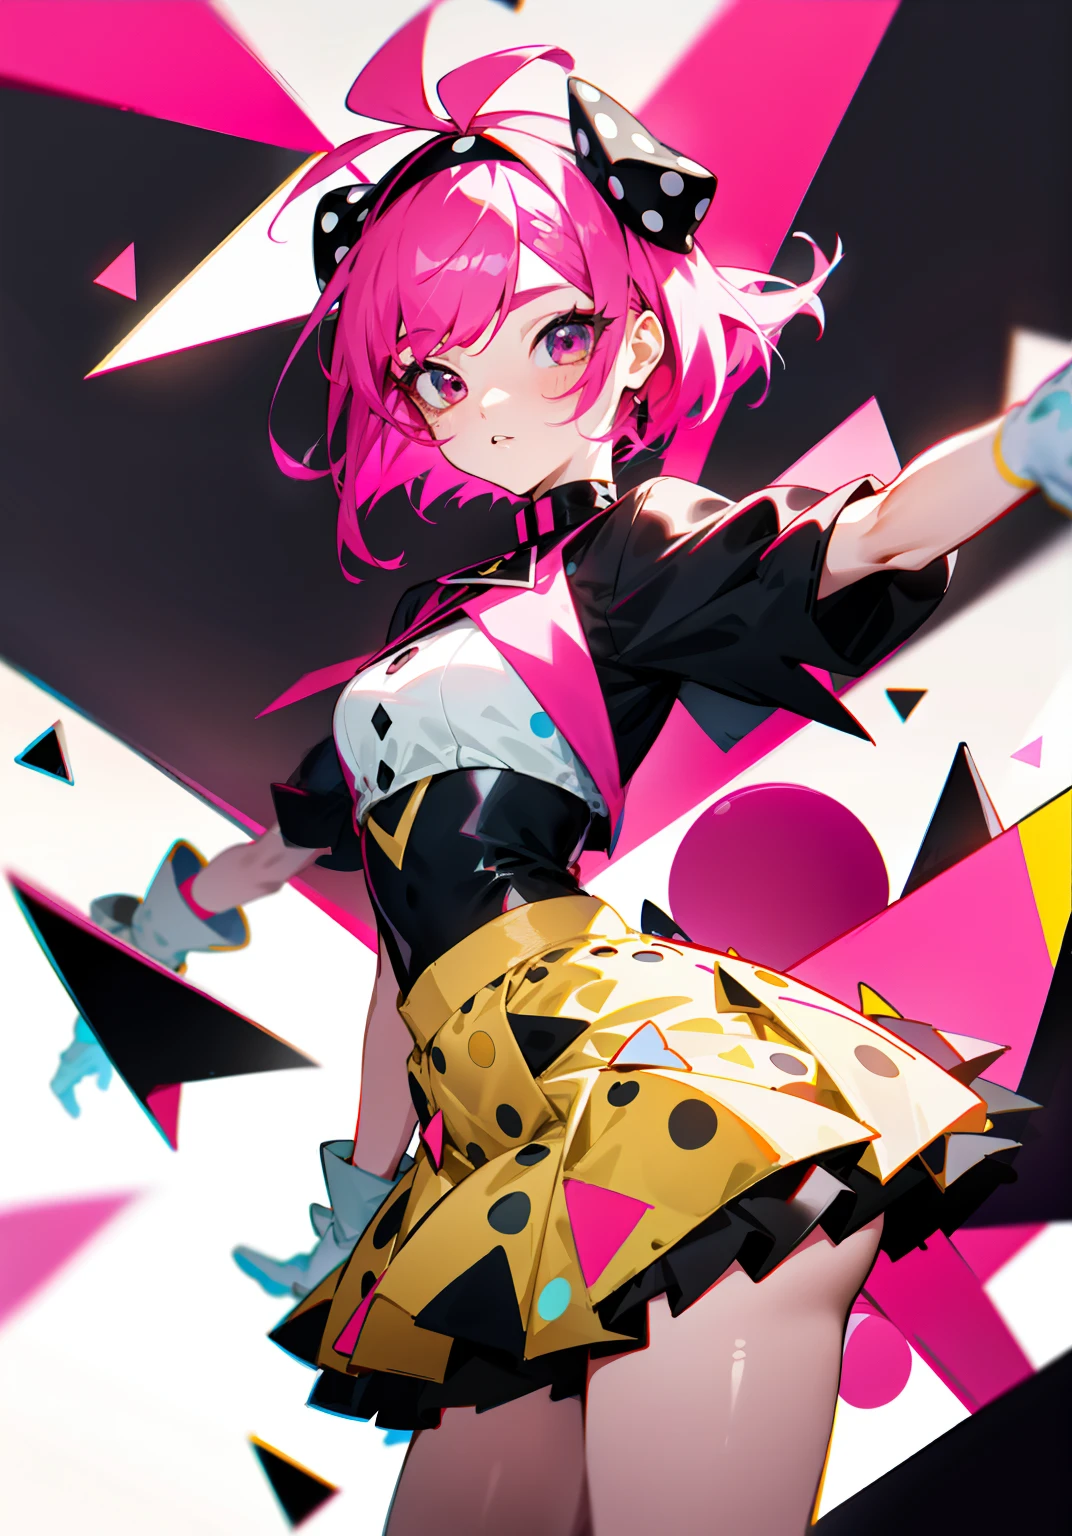 kpop girl with short nice fadecut pink hair, lots of shapes attatched everywhere, random shapes mostly triangle, yellow skirt with polcadots, red gloves, and an 2 antena headband